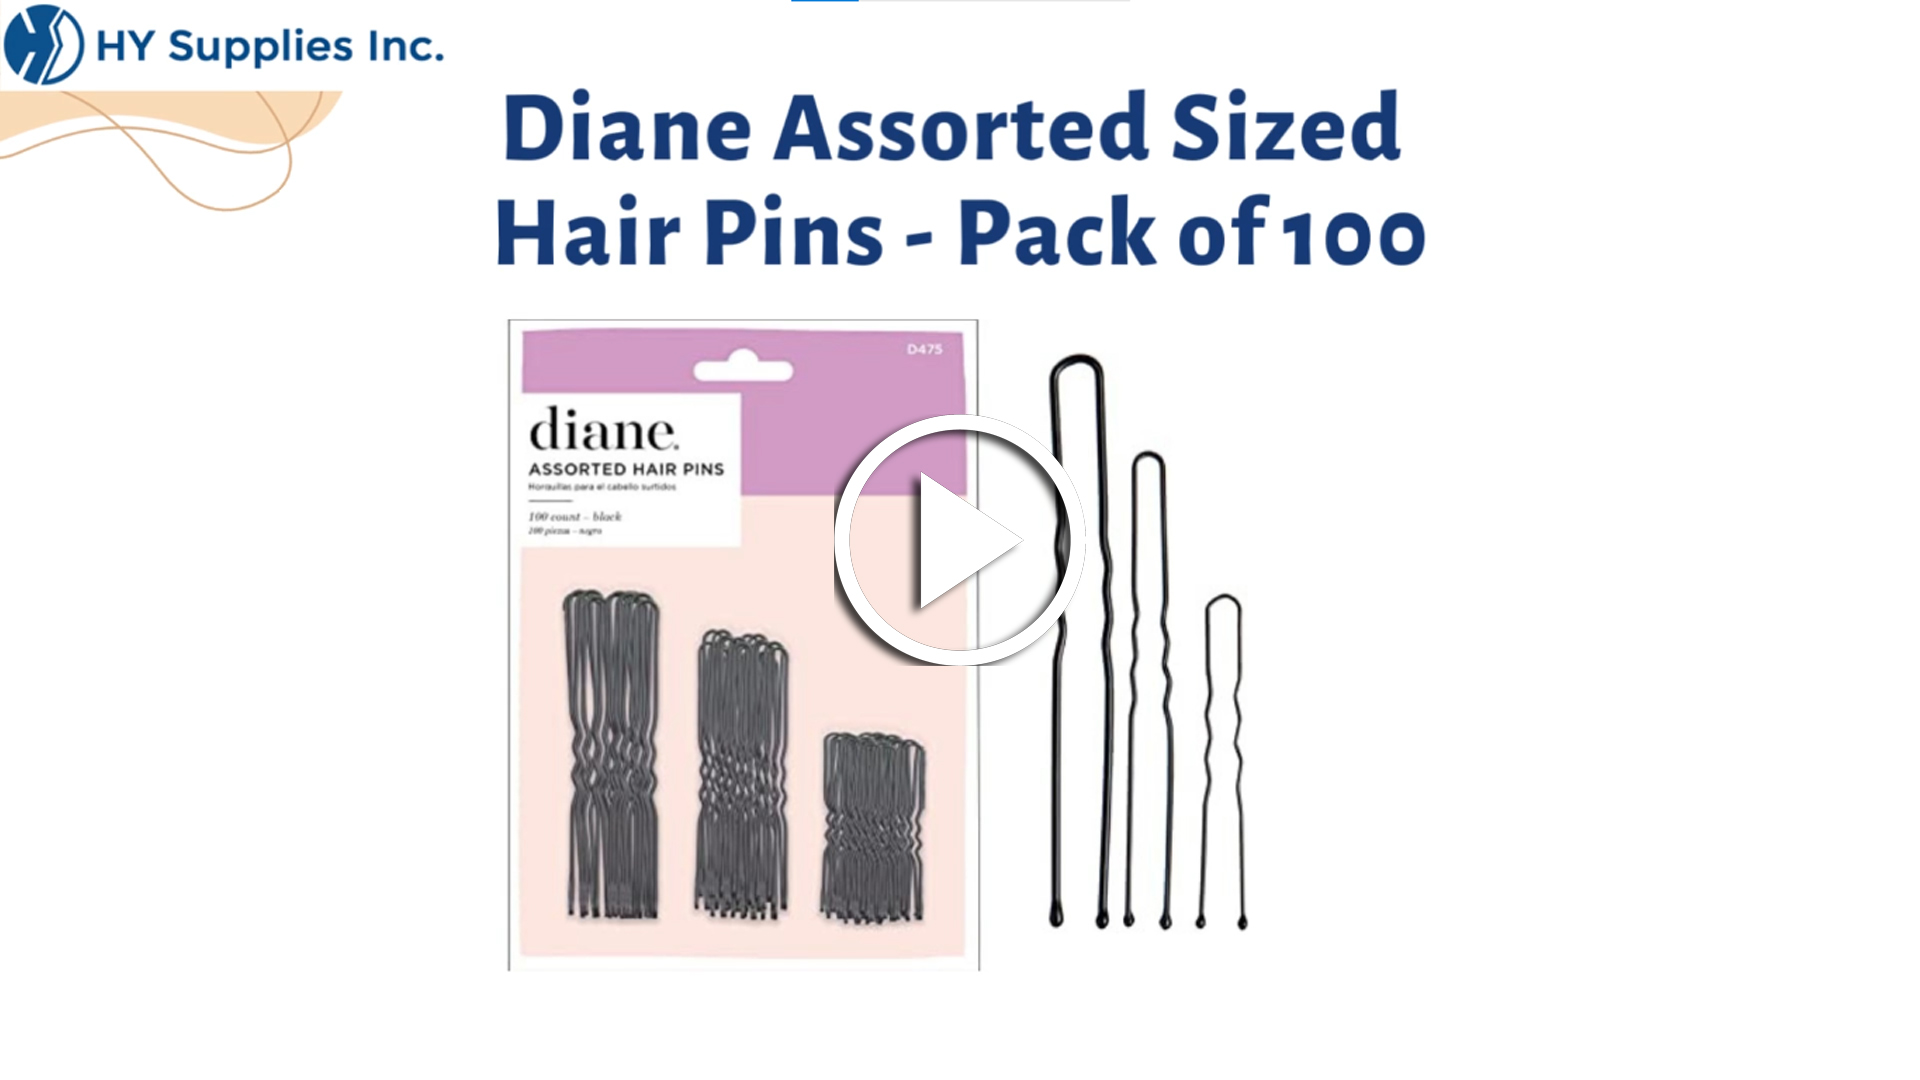 Diane Assorted Sized Hair Pins - Pack of 100